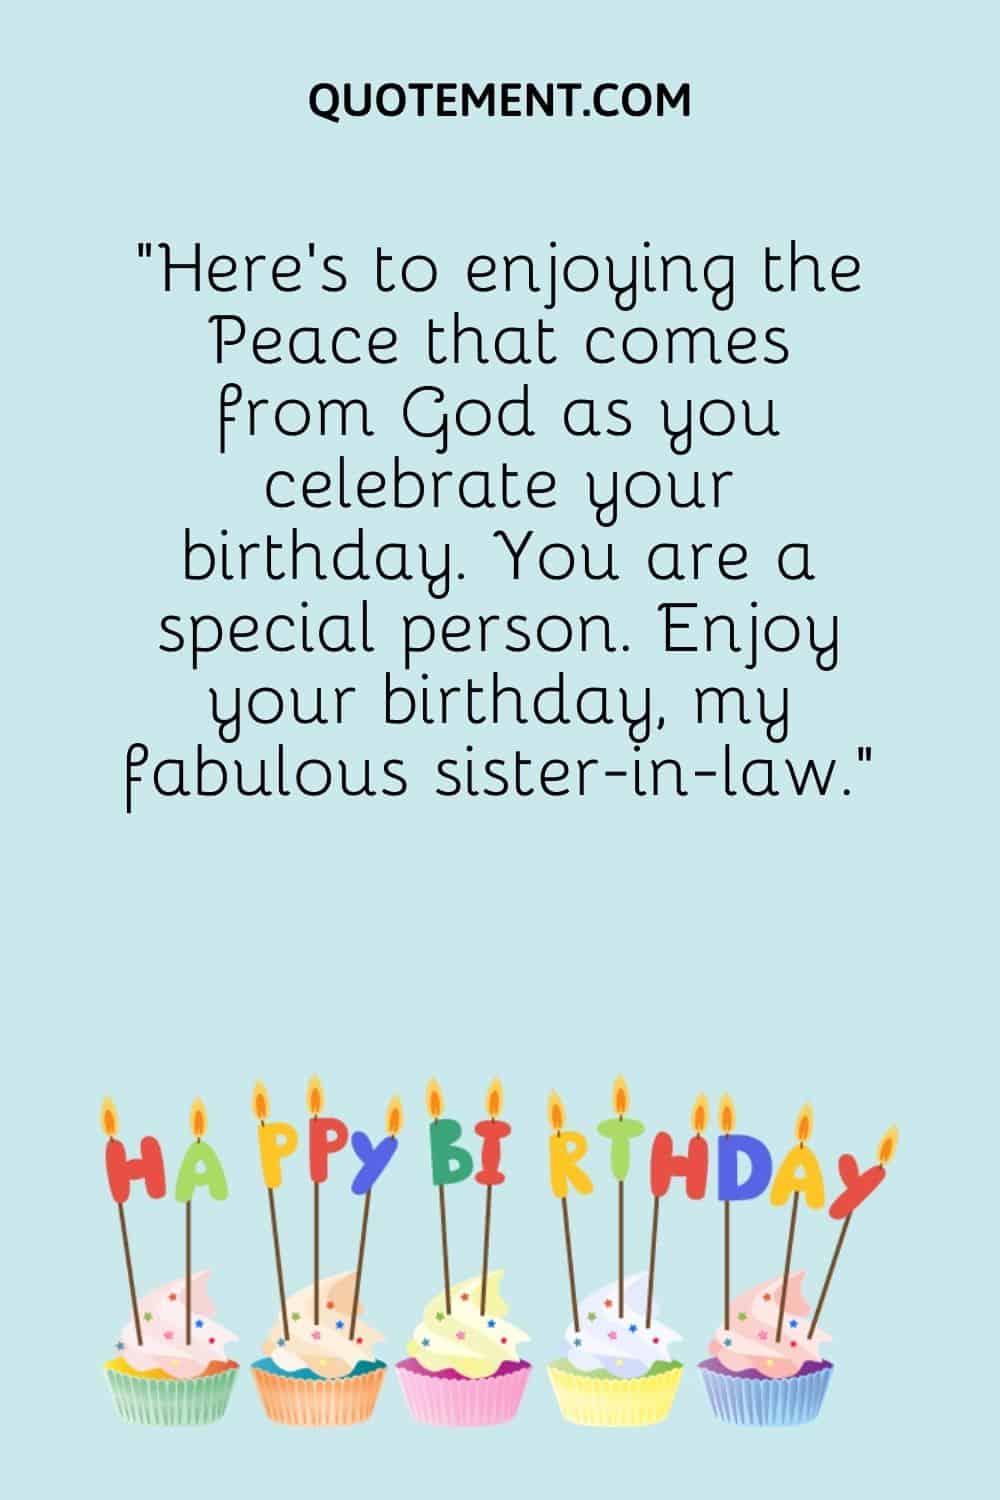 Here’s to enjoying the Peace that comes from God as you celebrate your birthday